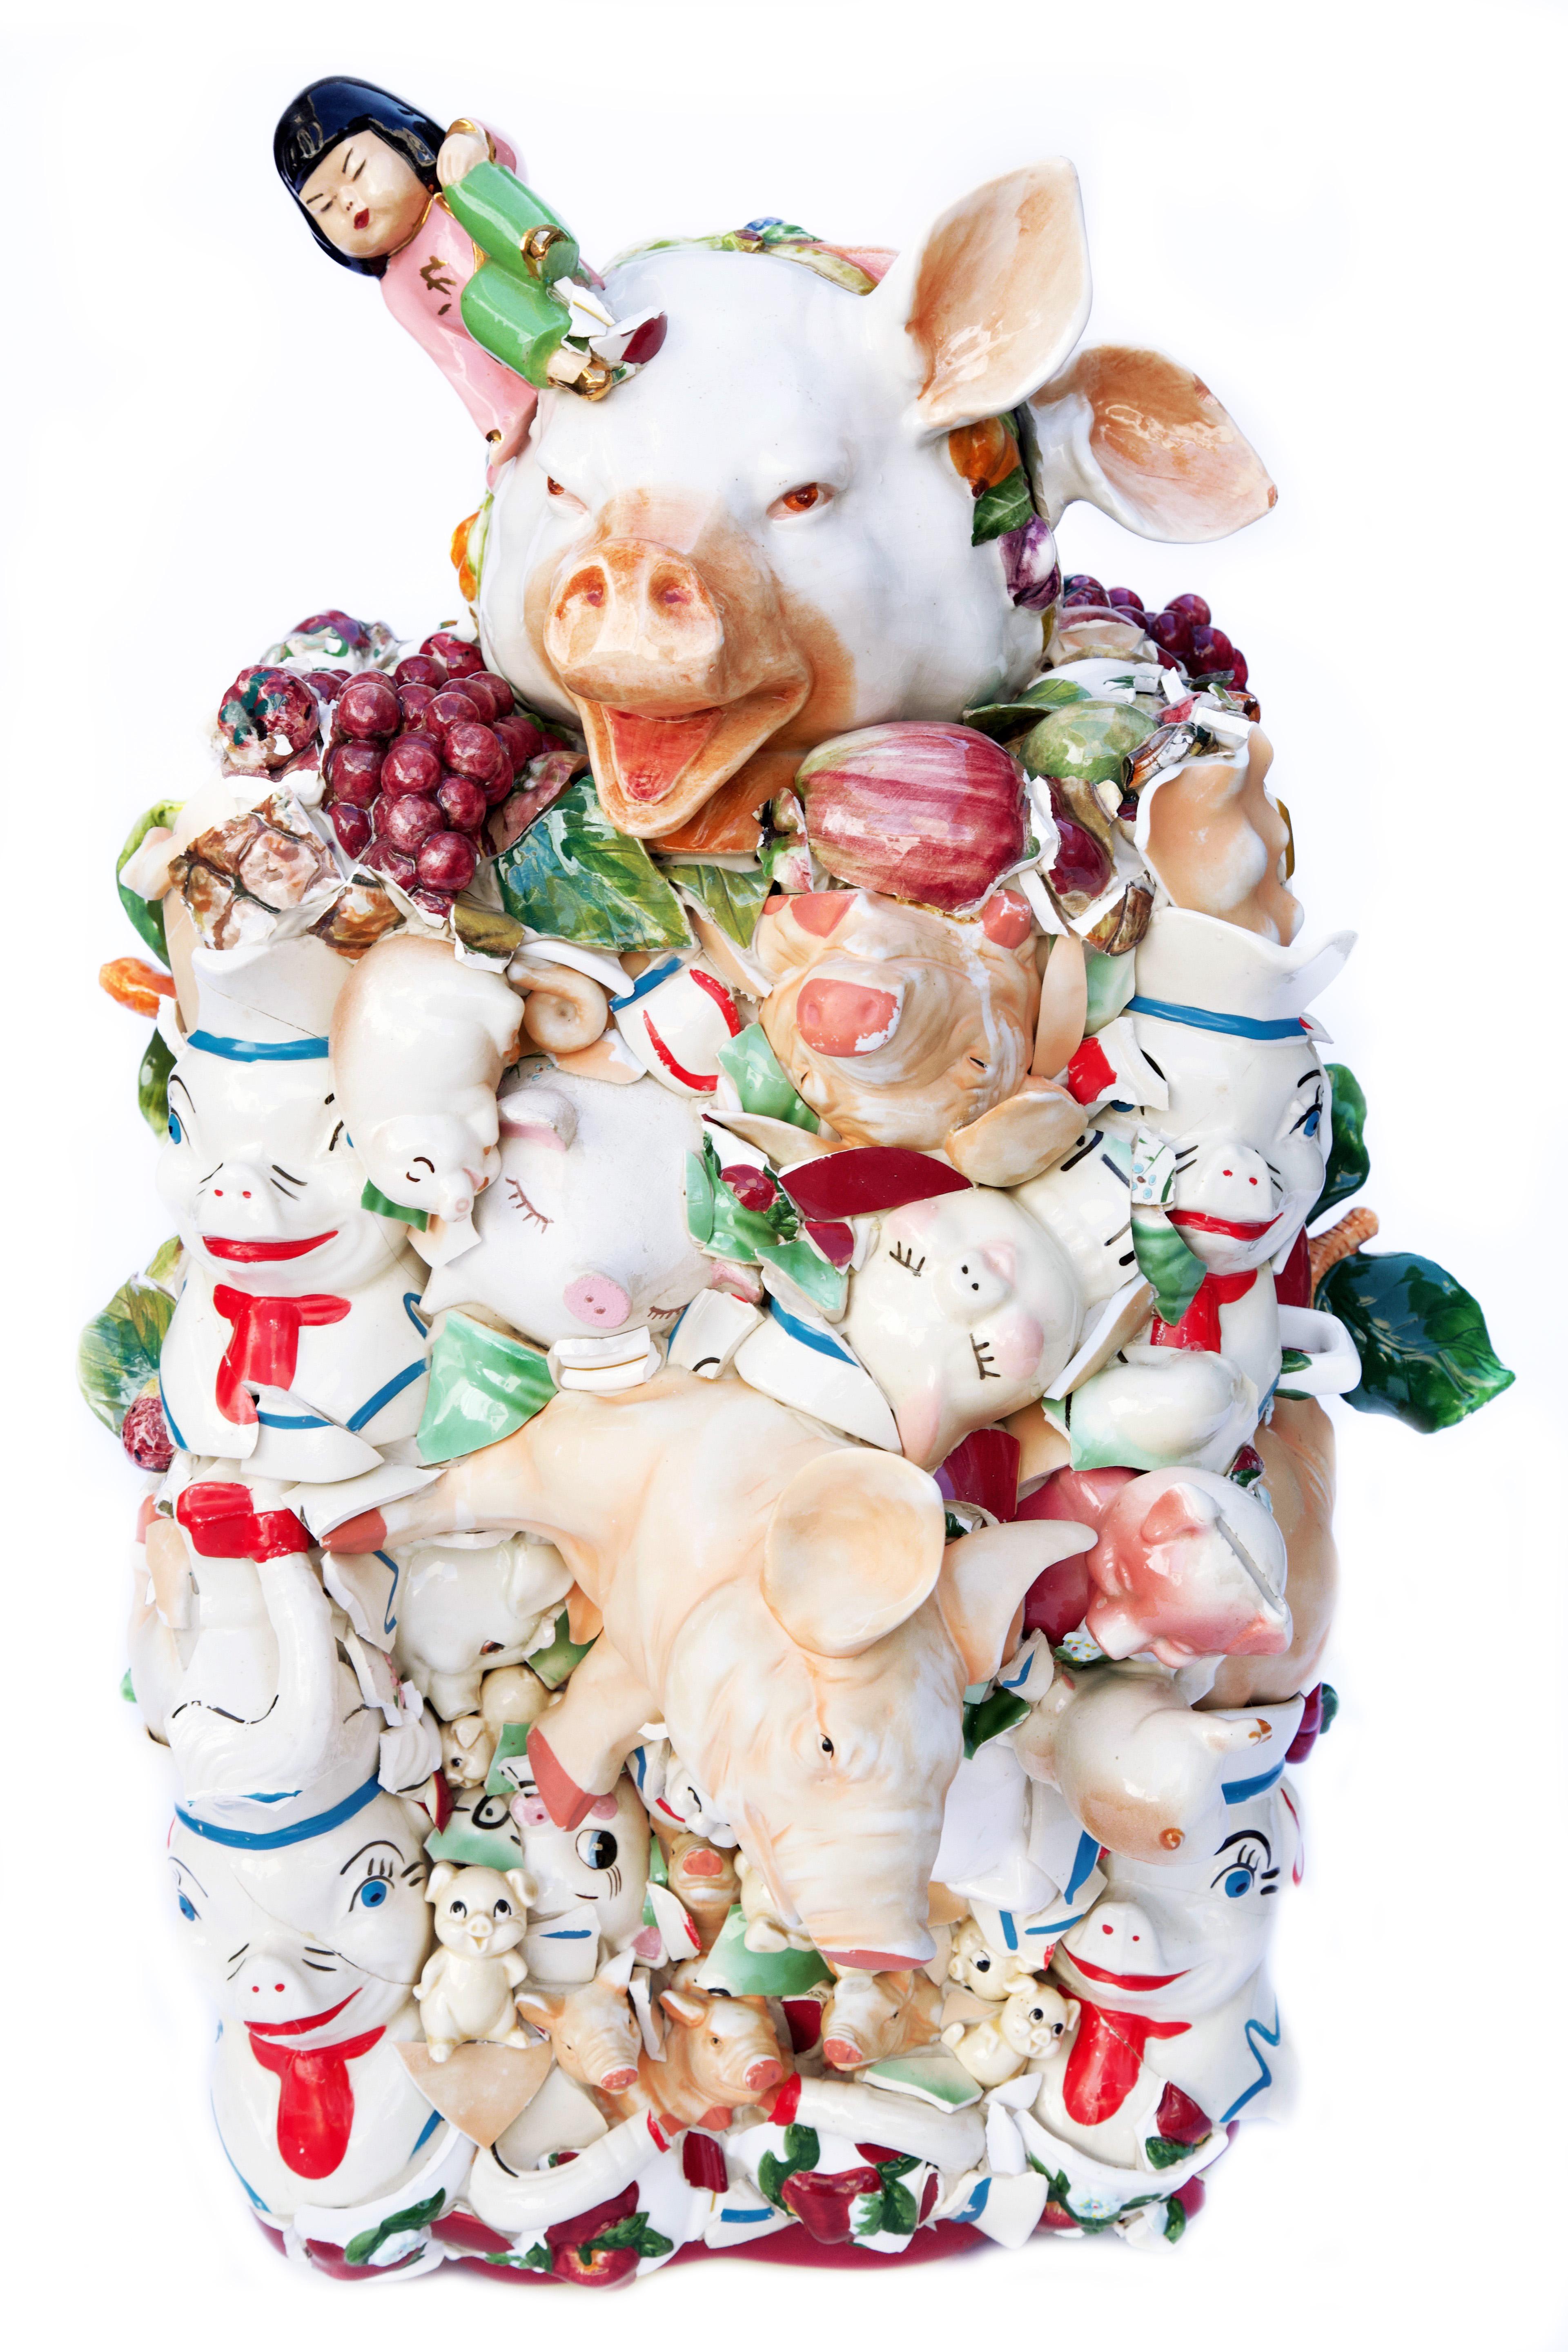 Chris Fraticelli Figurative Sculpture - You Are The Pigs, contemporary, sculpture, ceramics, red, green, pink, white